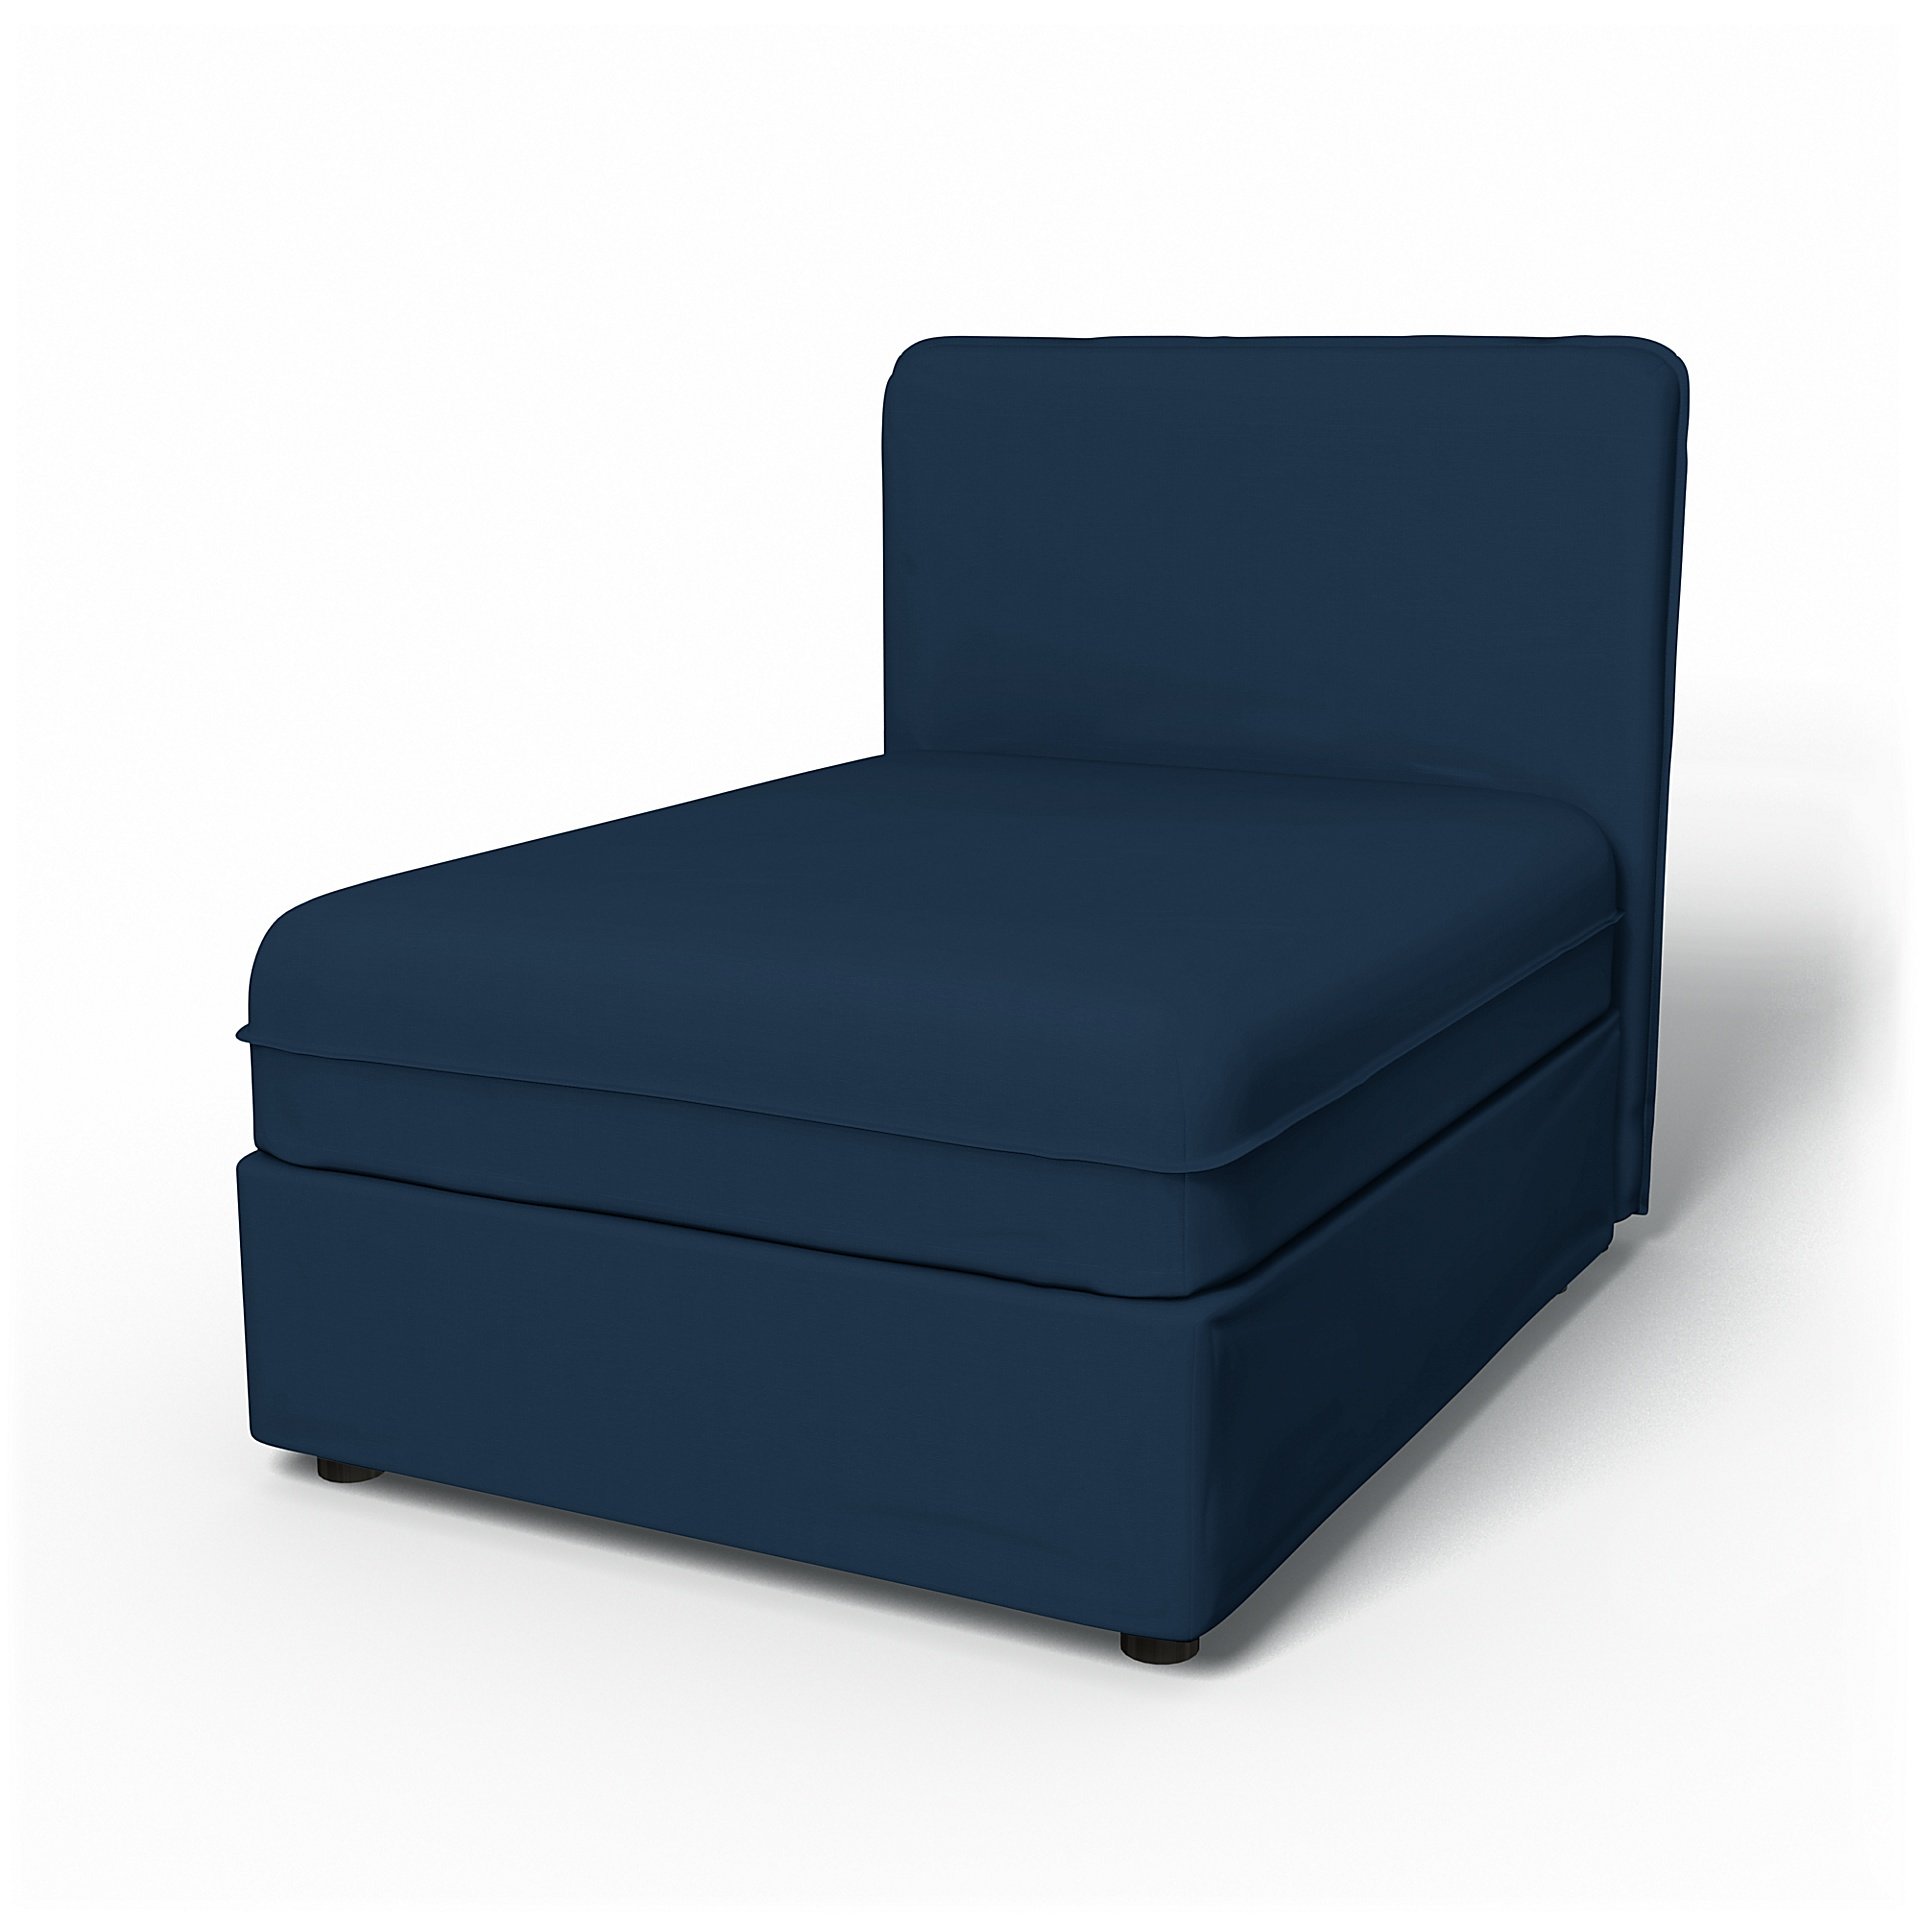 IKEA - Vallentuna Seat Module with Low Back Cover 80x100cm 32x39in, Deep Navy Blue, Cotton - Bemz